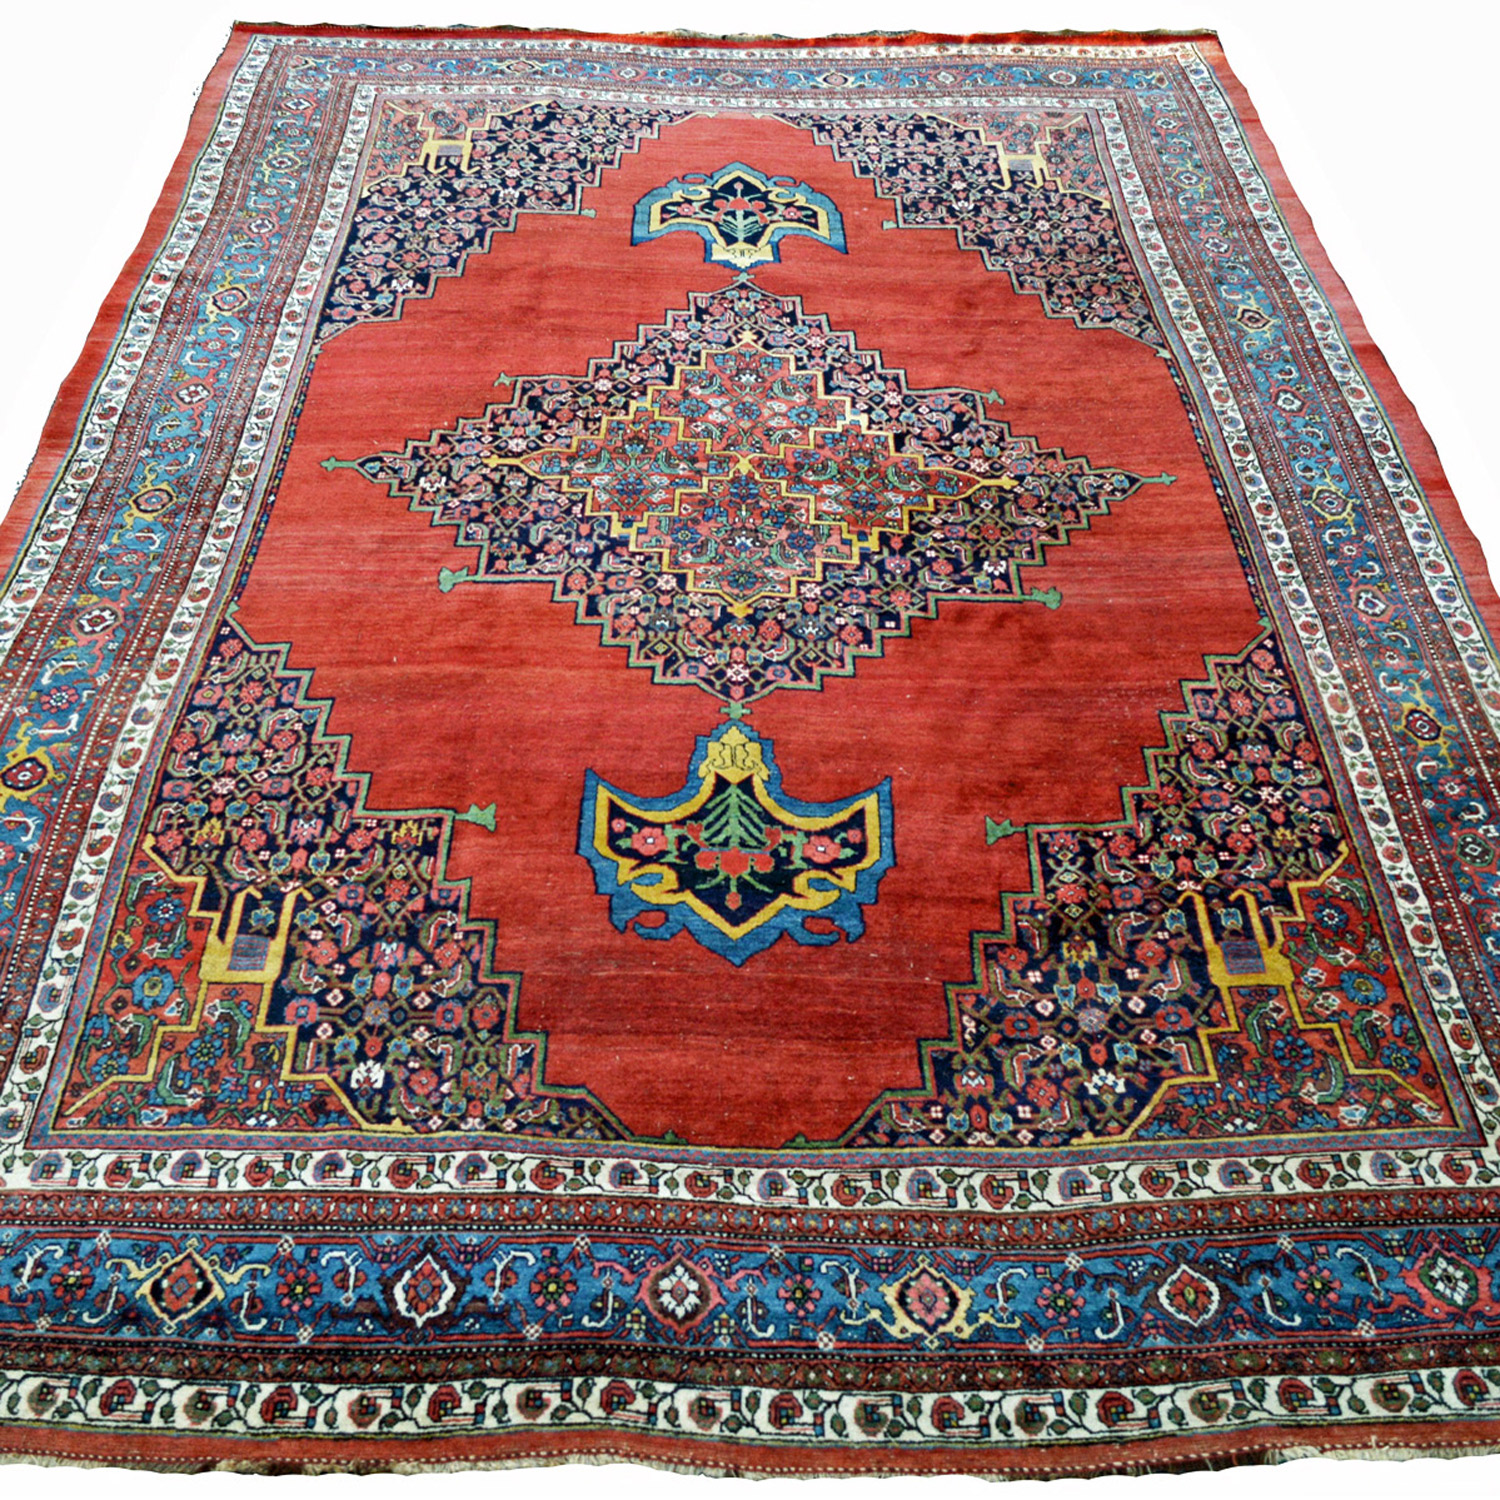 An antique Persian Bidjar carpet with a red open field decorated with a navy medallion and framed by navy, Herati design spandrels and a deep sky blue Turtle design border, northwest Persia, Kurdistan province, circa 1890 - Douglas Stock Gallery, antique Persian carpets Boston,MA area, antique riugs South Natick / Wellesley area, Oriental rugs New England